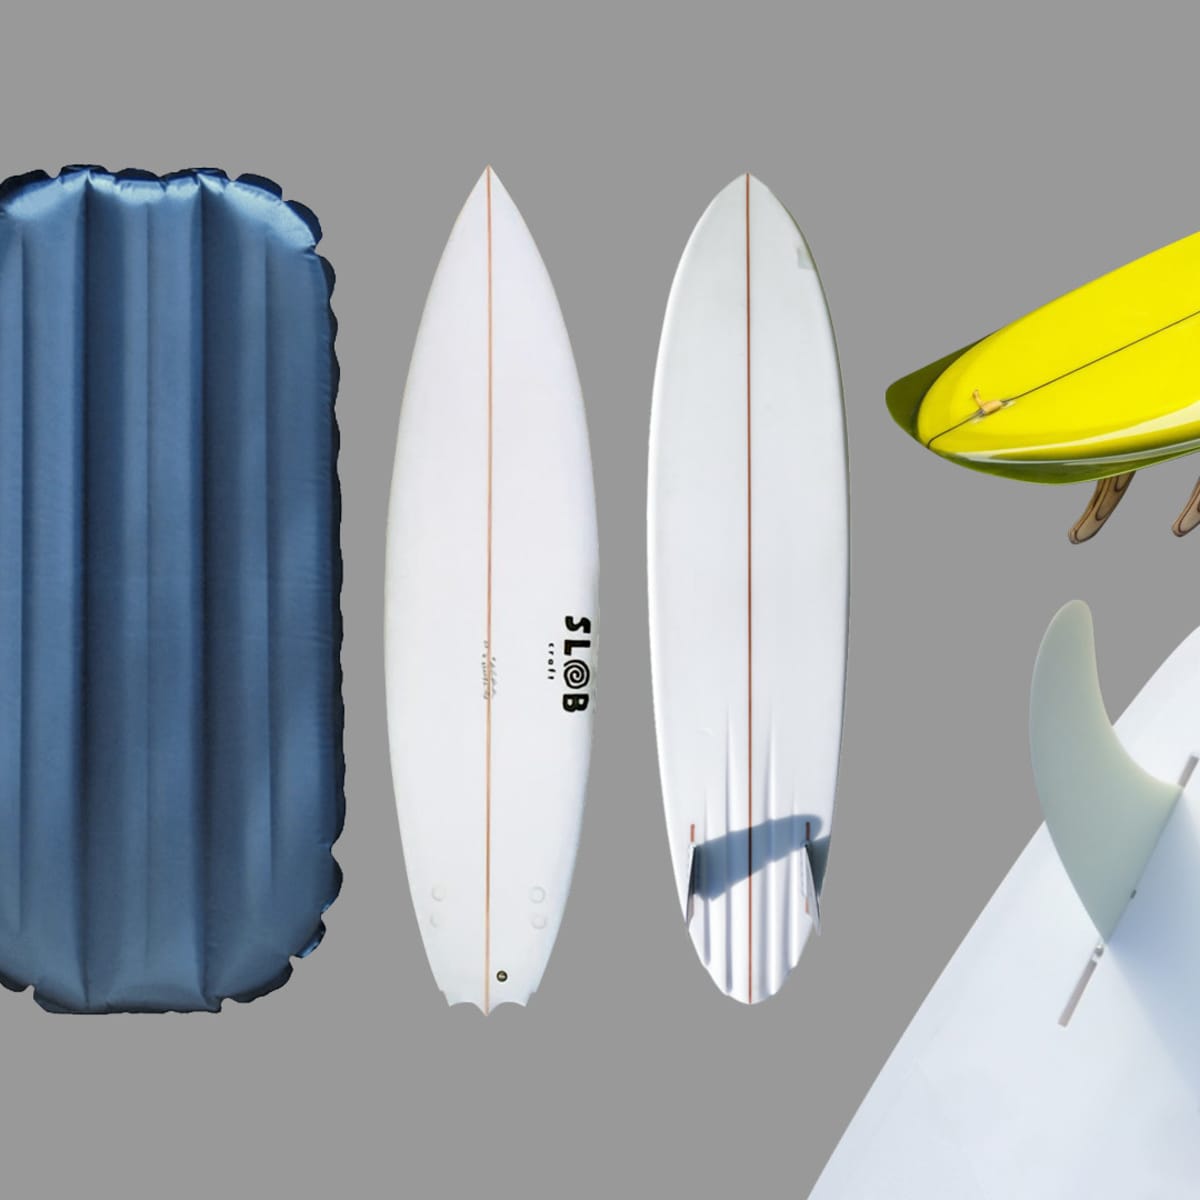 8 Unconventional Boards We're Dying to Try This Season